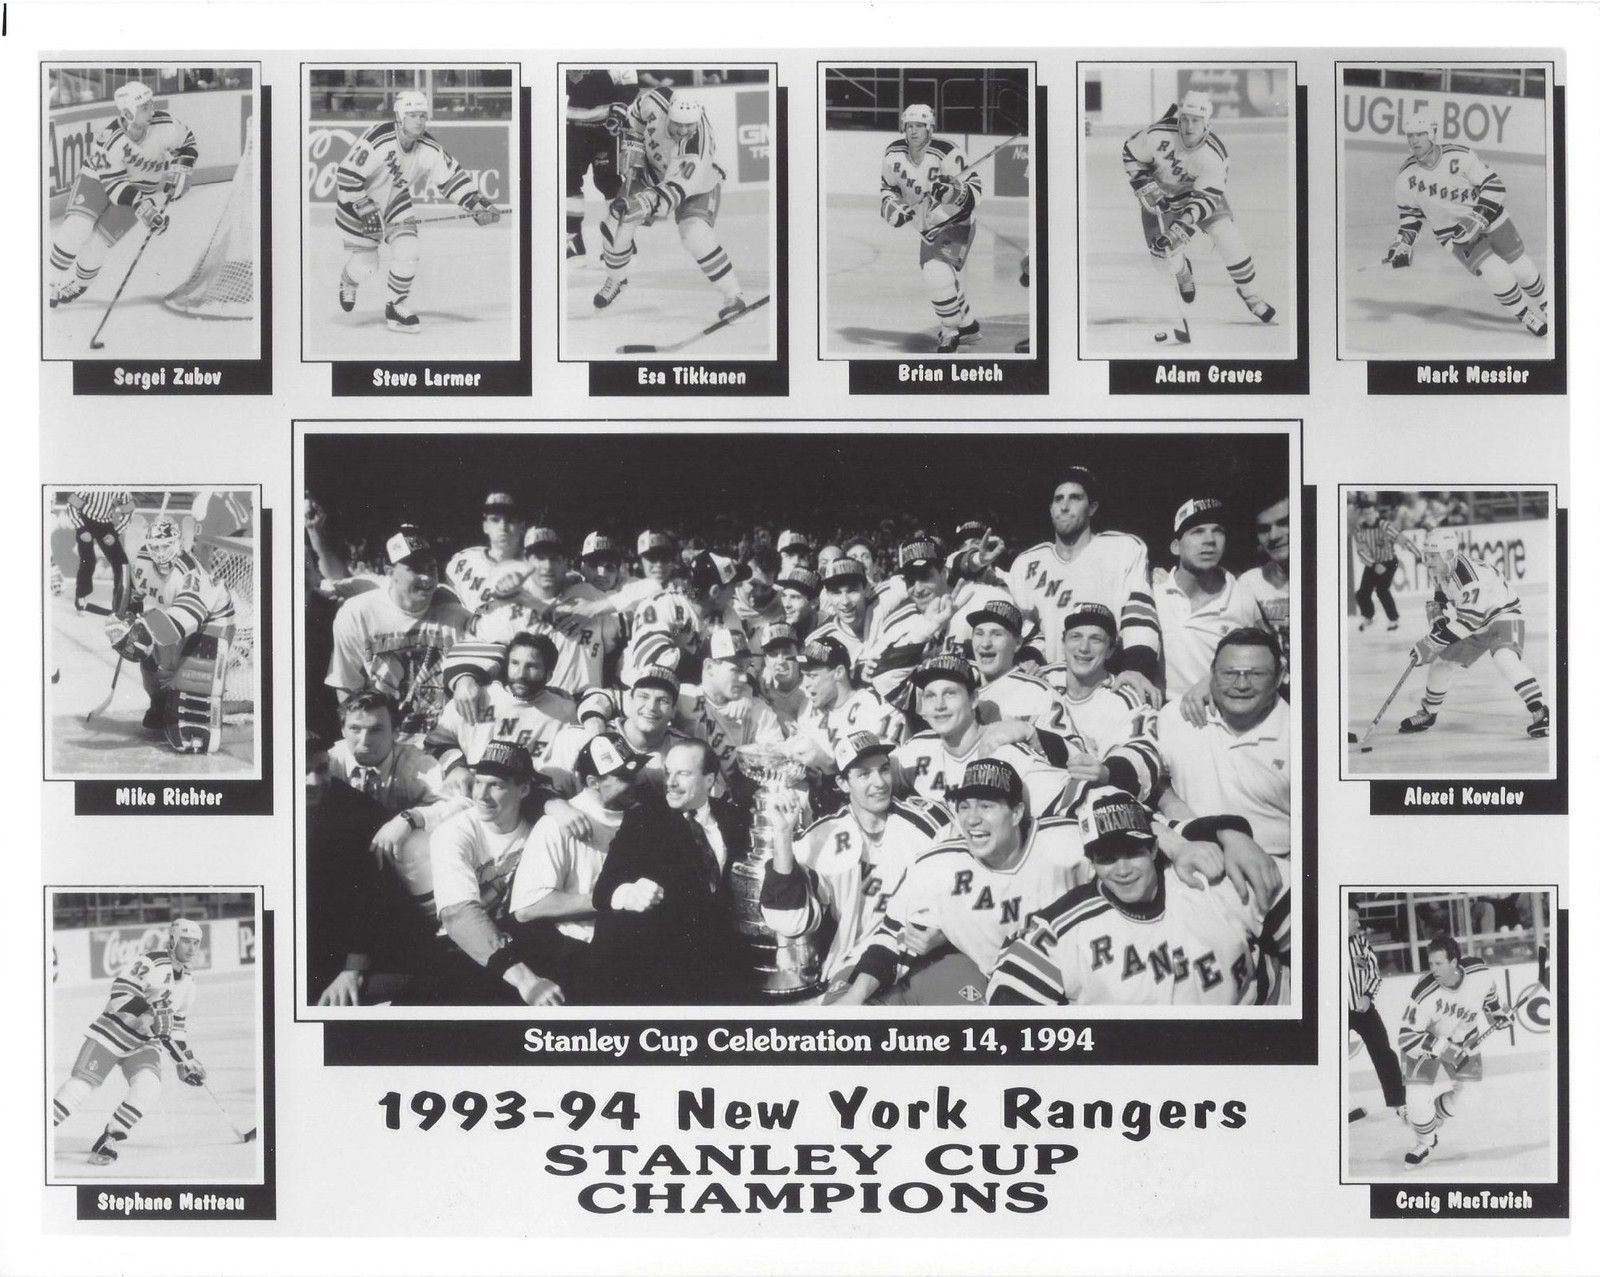 NEW YORK RANGERS 1993-94 COLLAGE NY 8X10 PHOTO NHL HOCKEY STANLEY CUP CHAMPIONS - $4.94